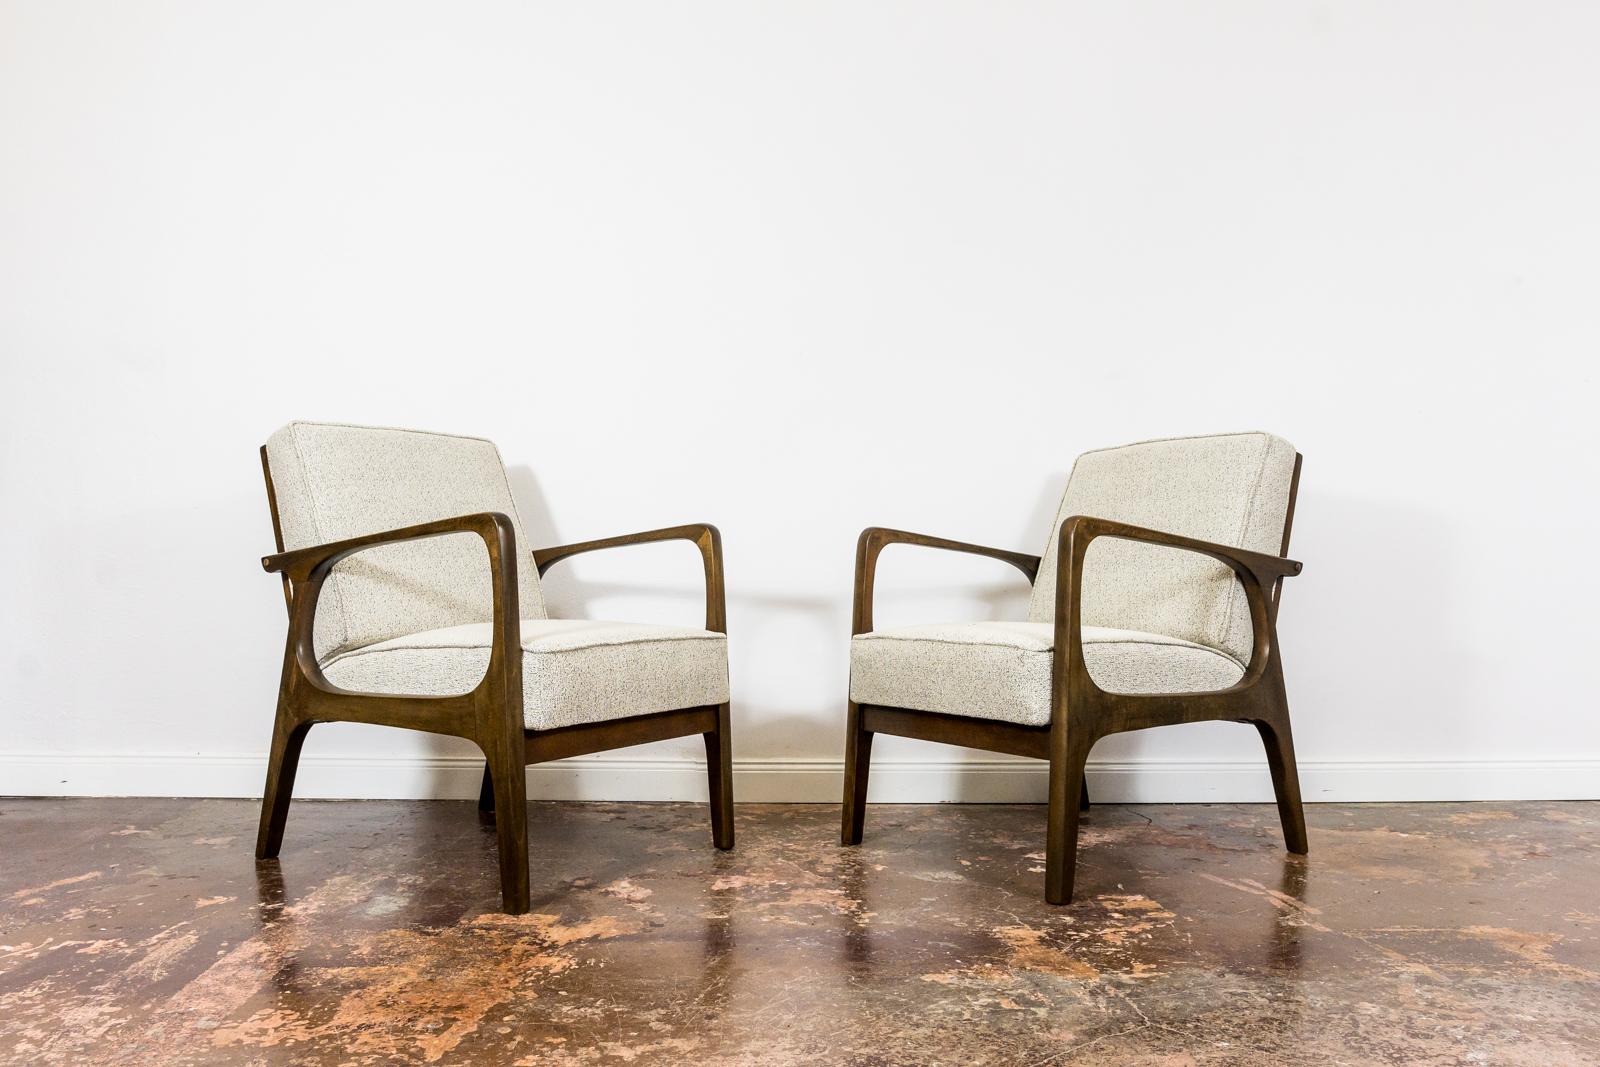 Mid-Century Modern Pair of Mid-Century Armchairs from Prudnickie Fabryki Mebli 1960's, Poland For Sale